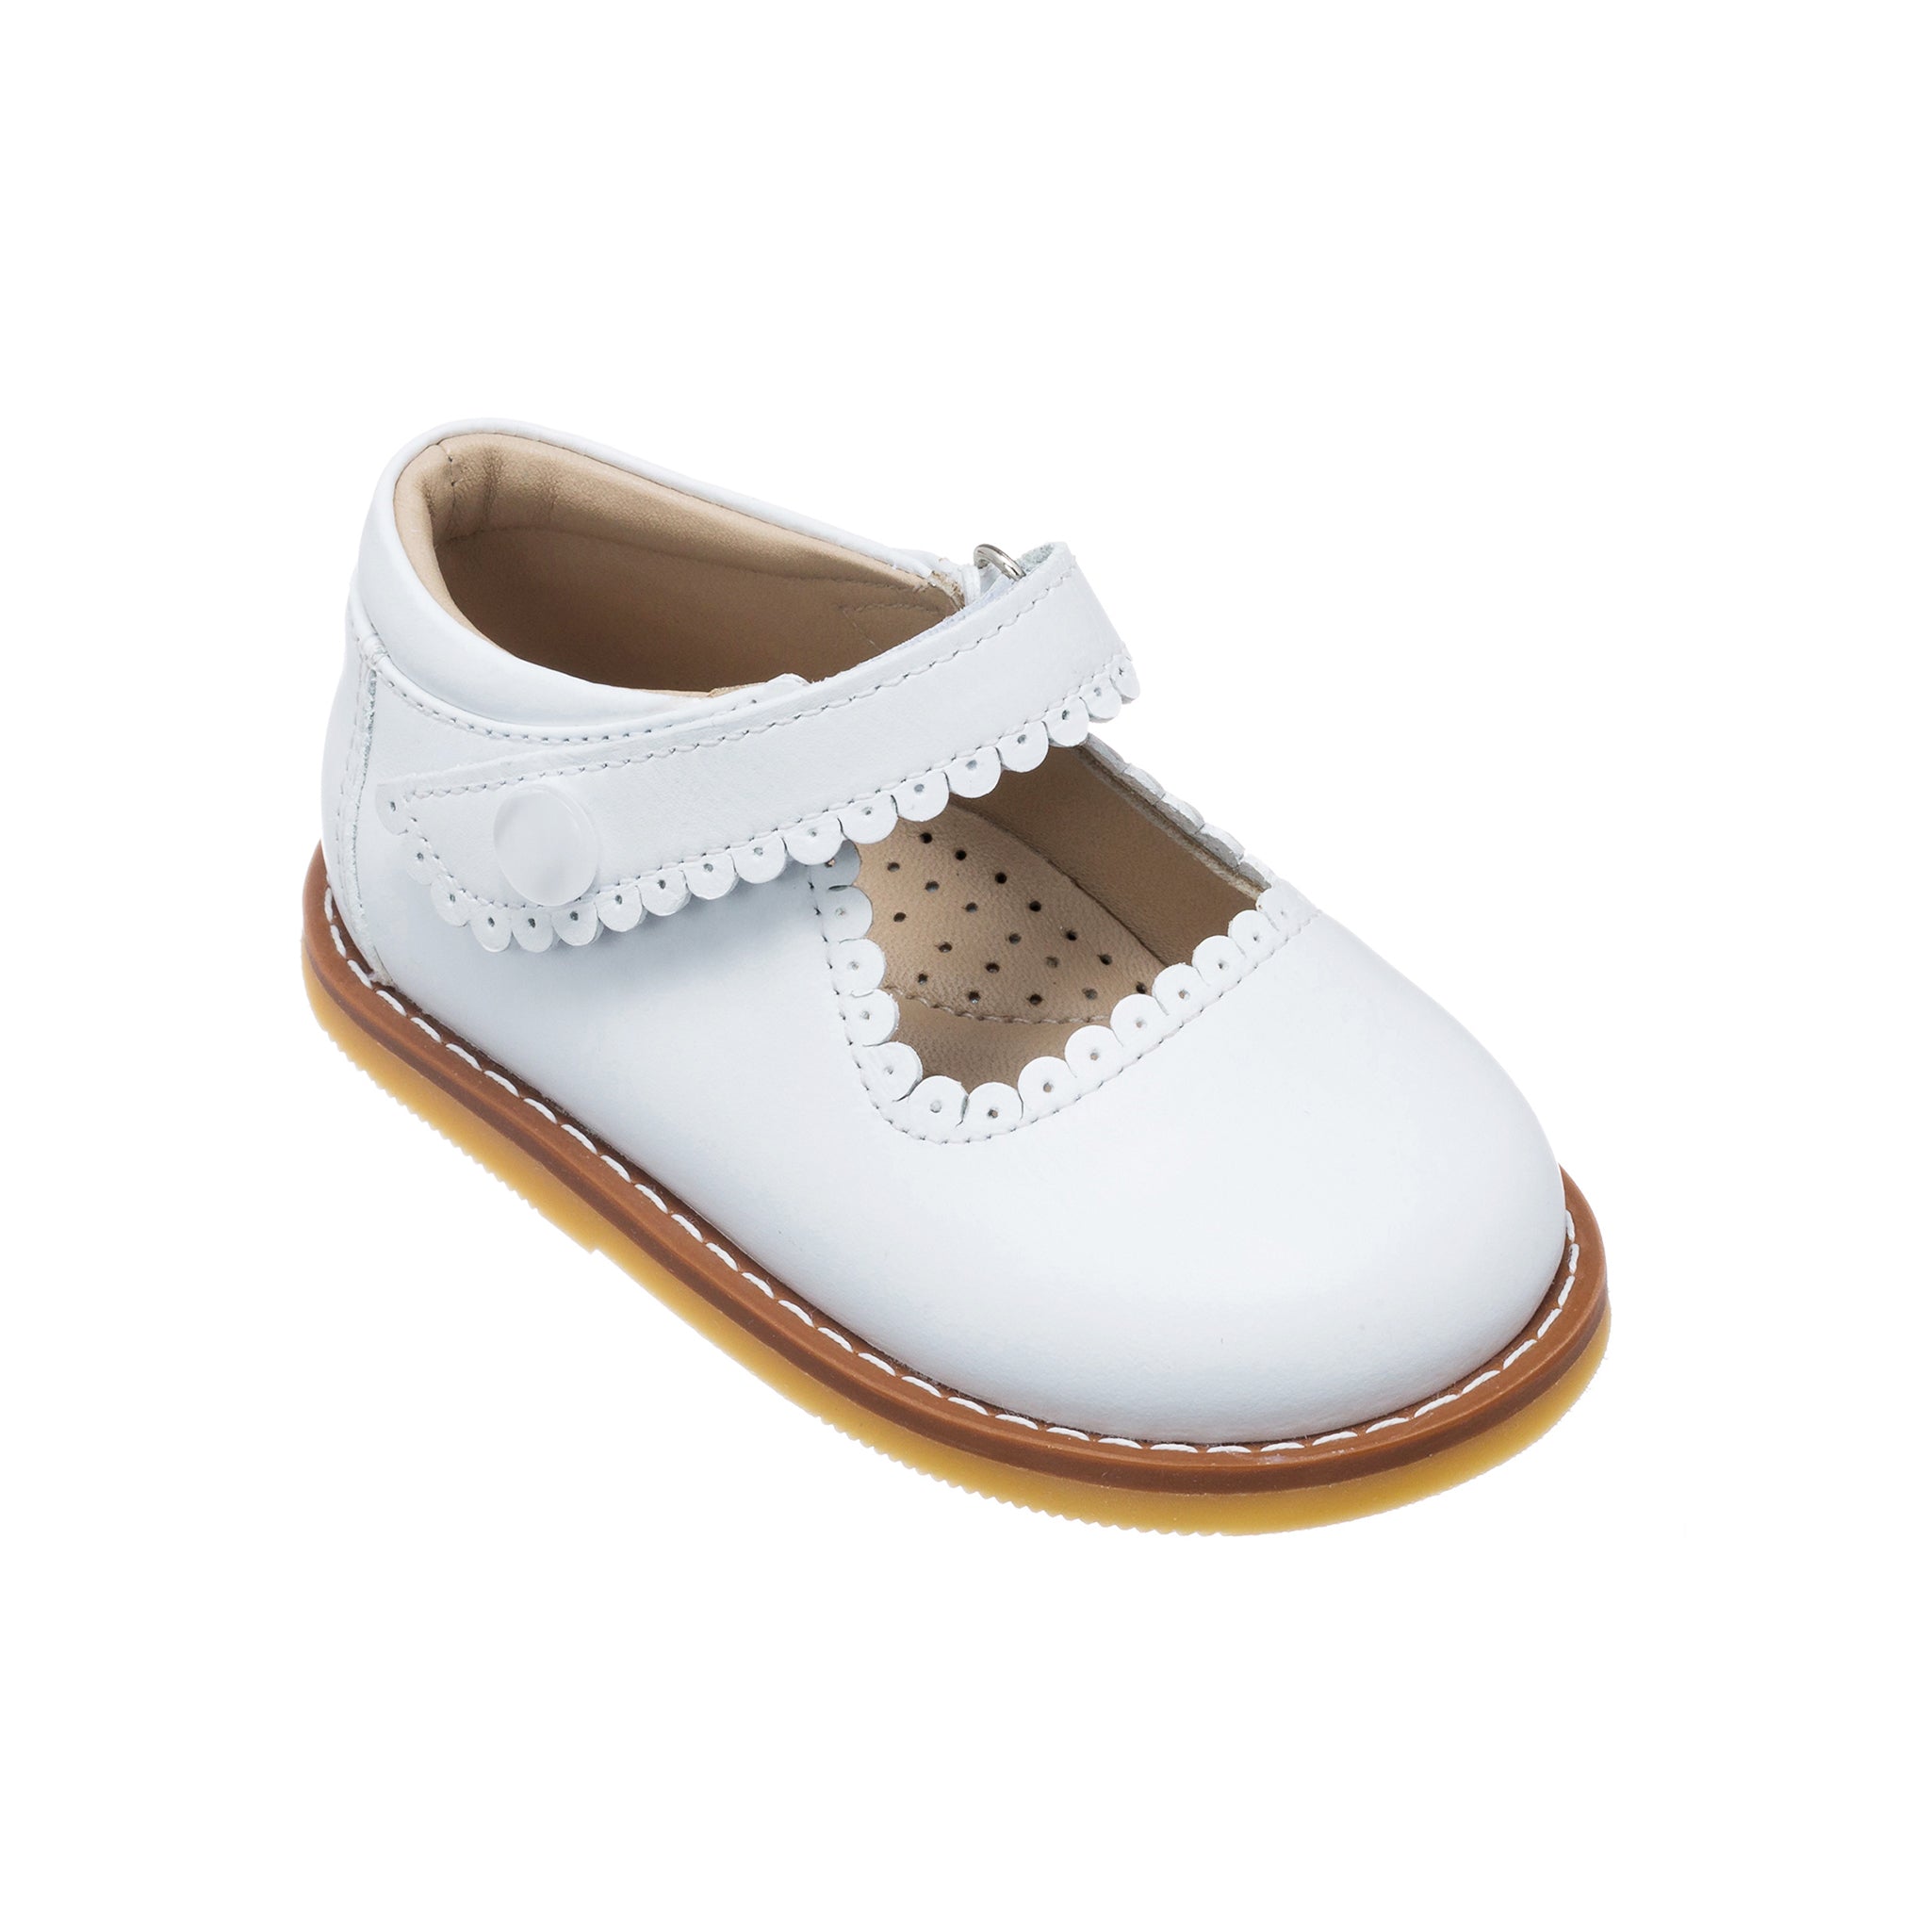 white mary jane shoes for toddlers